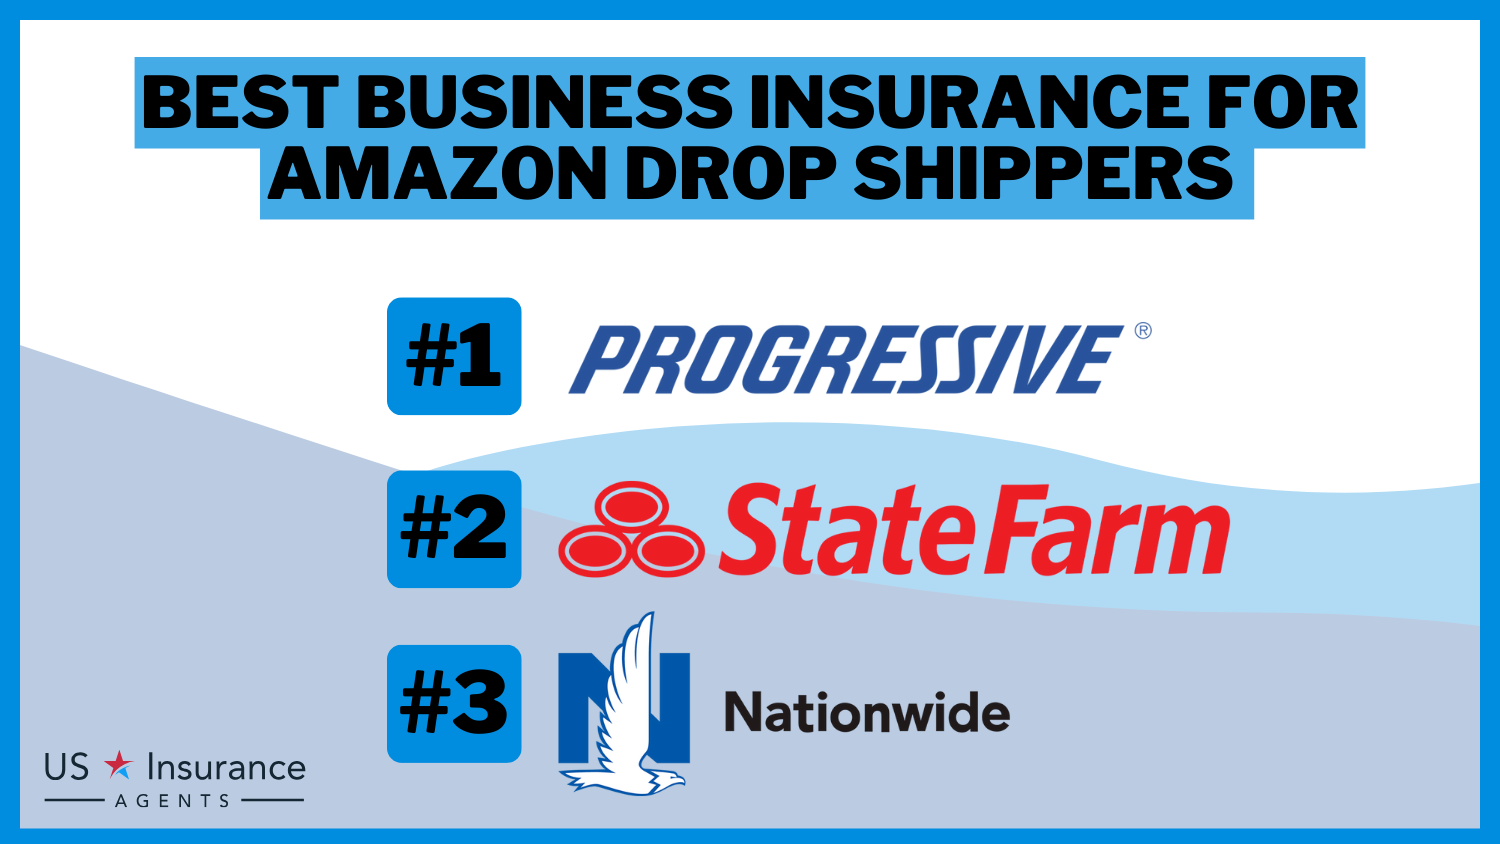 3 Best Business Insurance for Amazon Dropshipping: Progressive, State Farm and Nationwide.